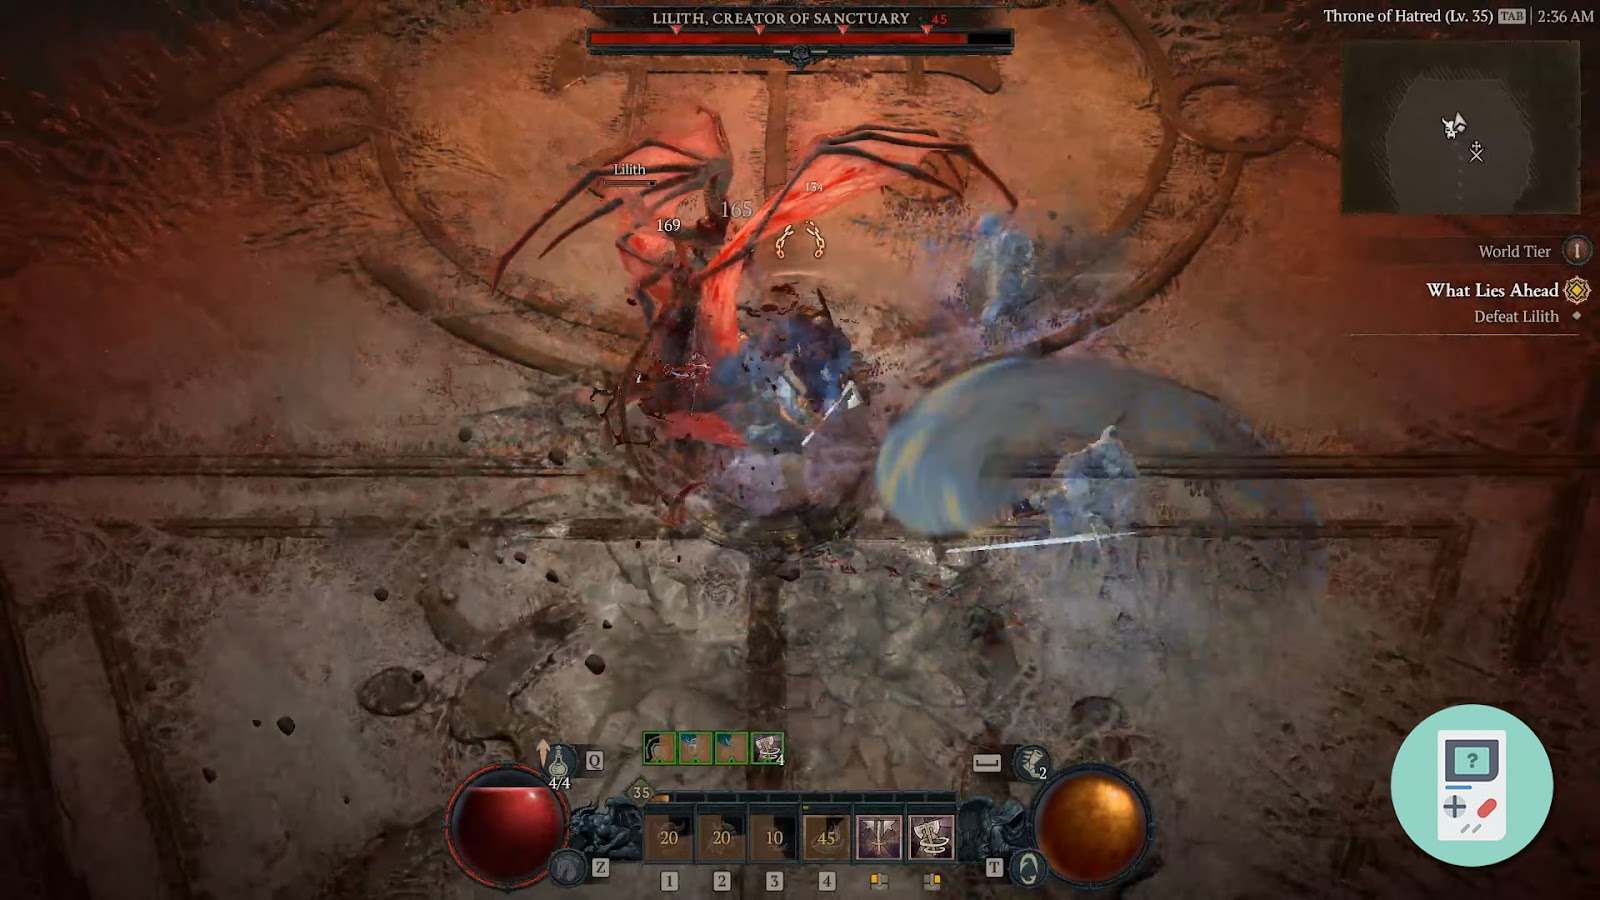 Proving Diablo 4 is too easy, gamers beat the final boss twice in a row in just over a minute - Photo 3.